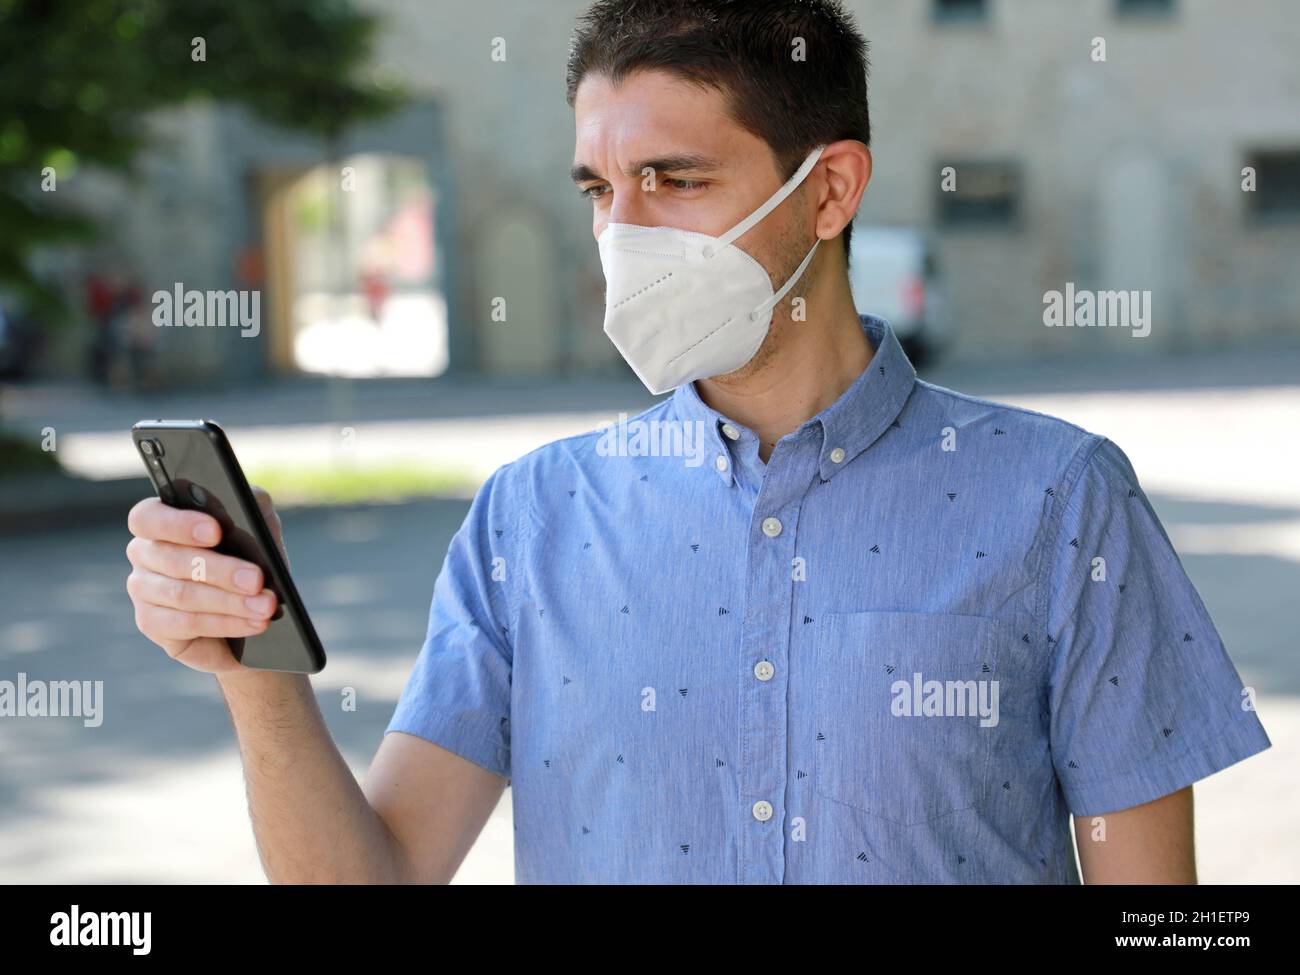 COVID-19 Mobile Application Young Man Wearing KN95 FFP2 Mask Using Smart Phone App in City Street to Aid Contact Tracing and Self Diagnostic in Respon Stock Photo